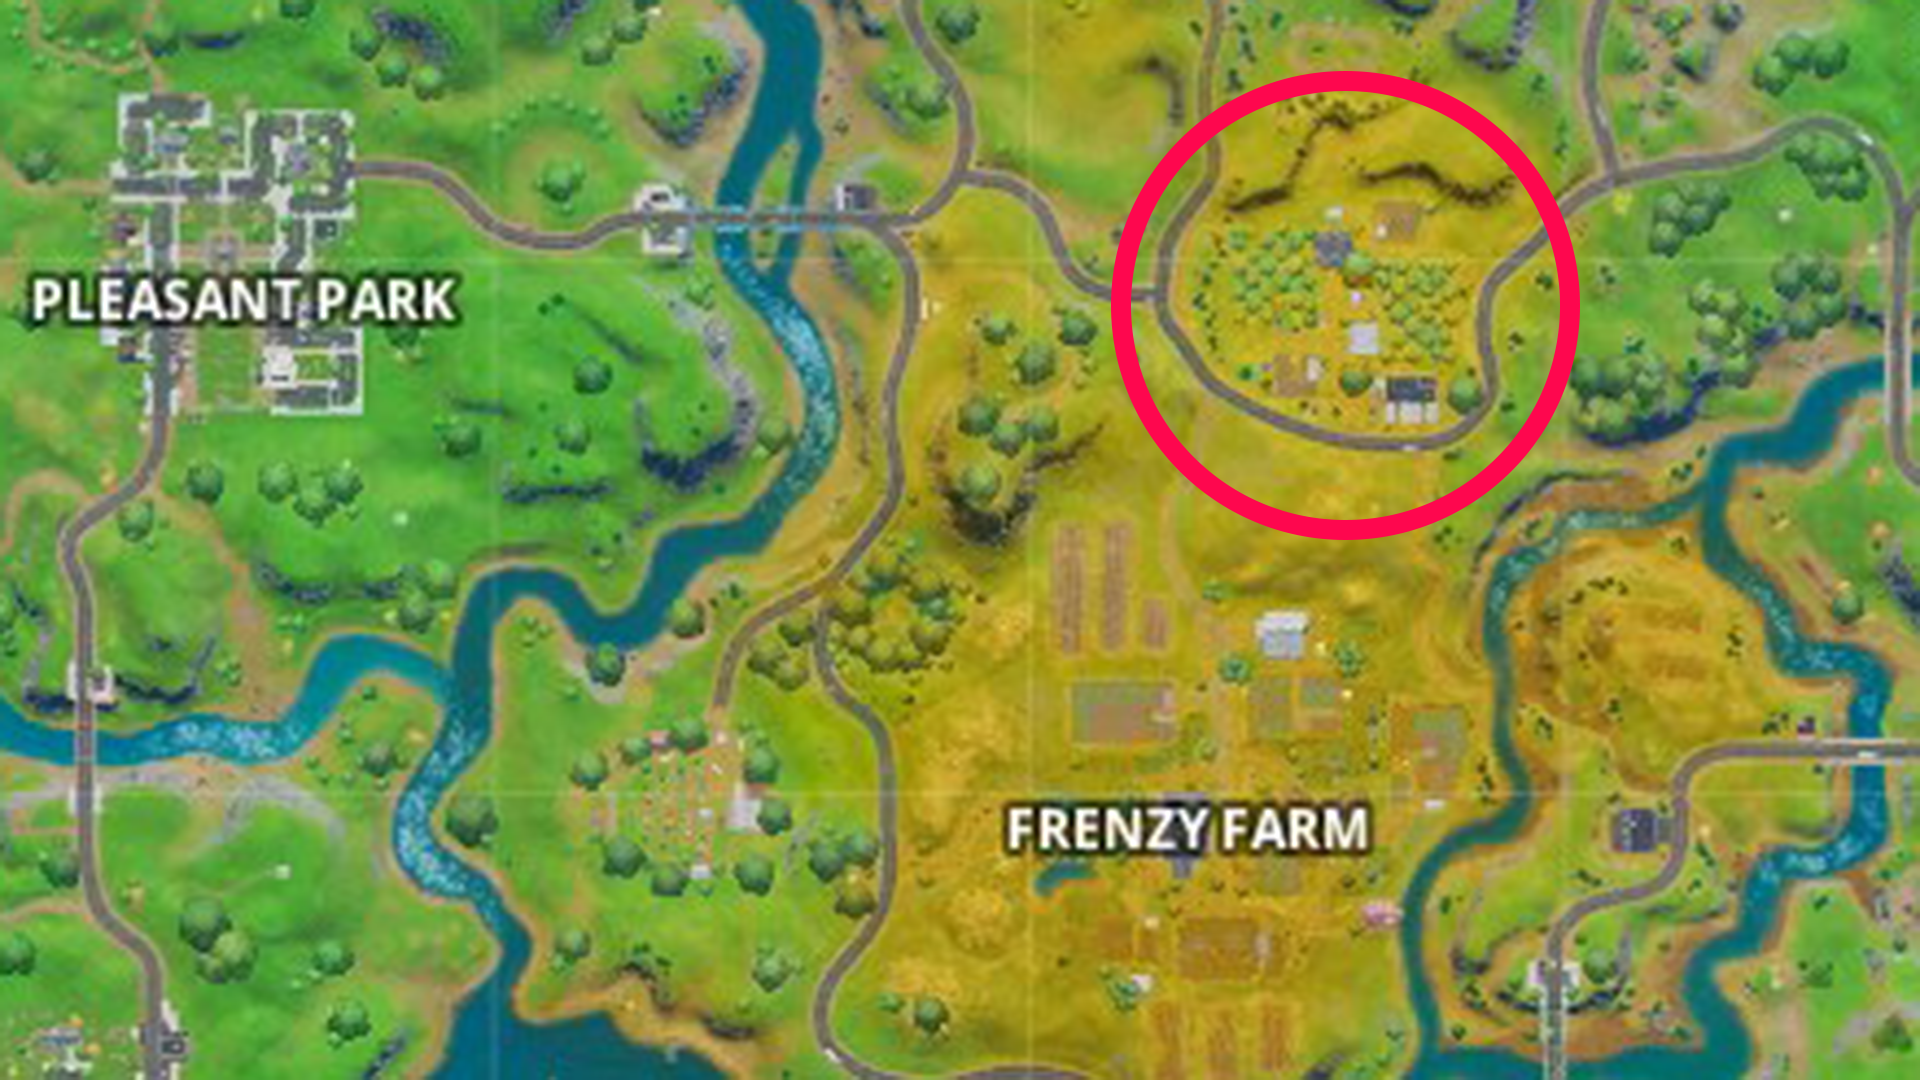 Fortnite Consume Apples 2021 Where To Consume Foraged Apples At The Orchard On Fortnite Map Sporting News